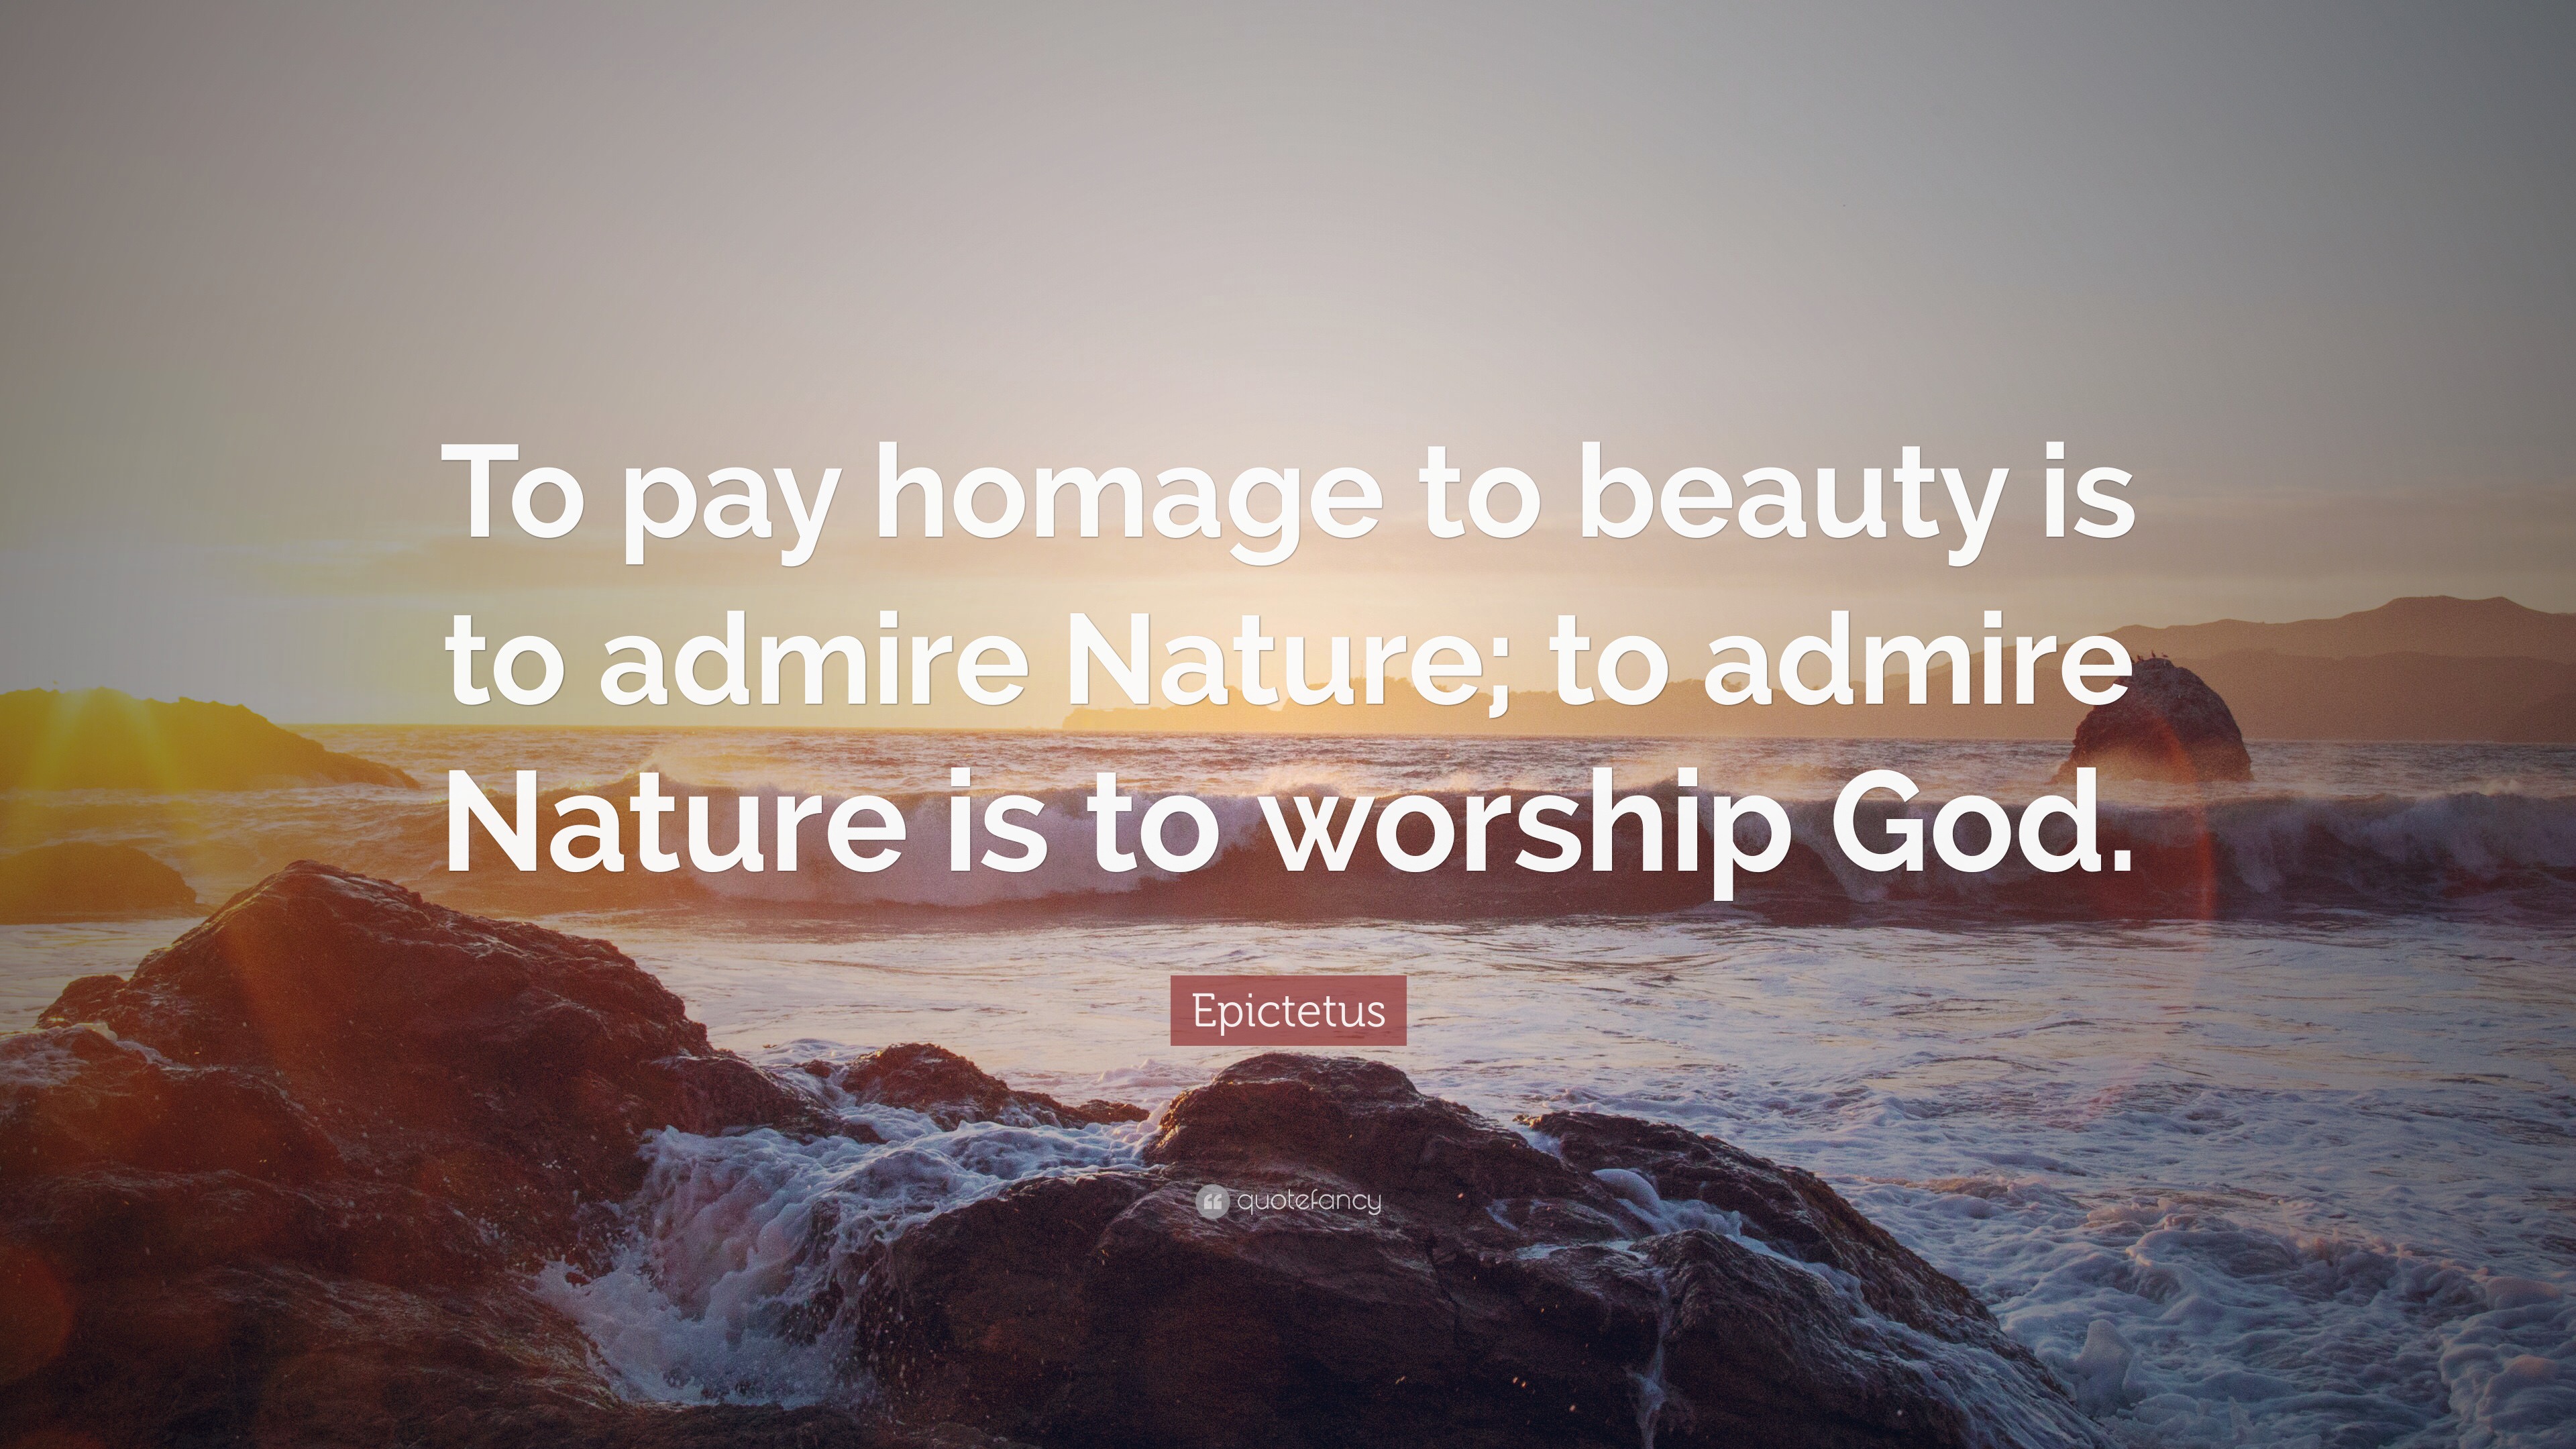 4779222-Epictetus-Quote-To-pay-homage-to-beauty-is-to-admire-Nature-to.jpg